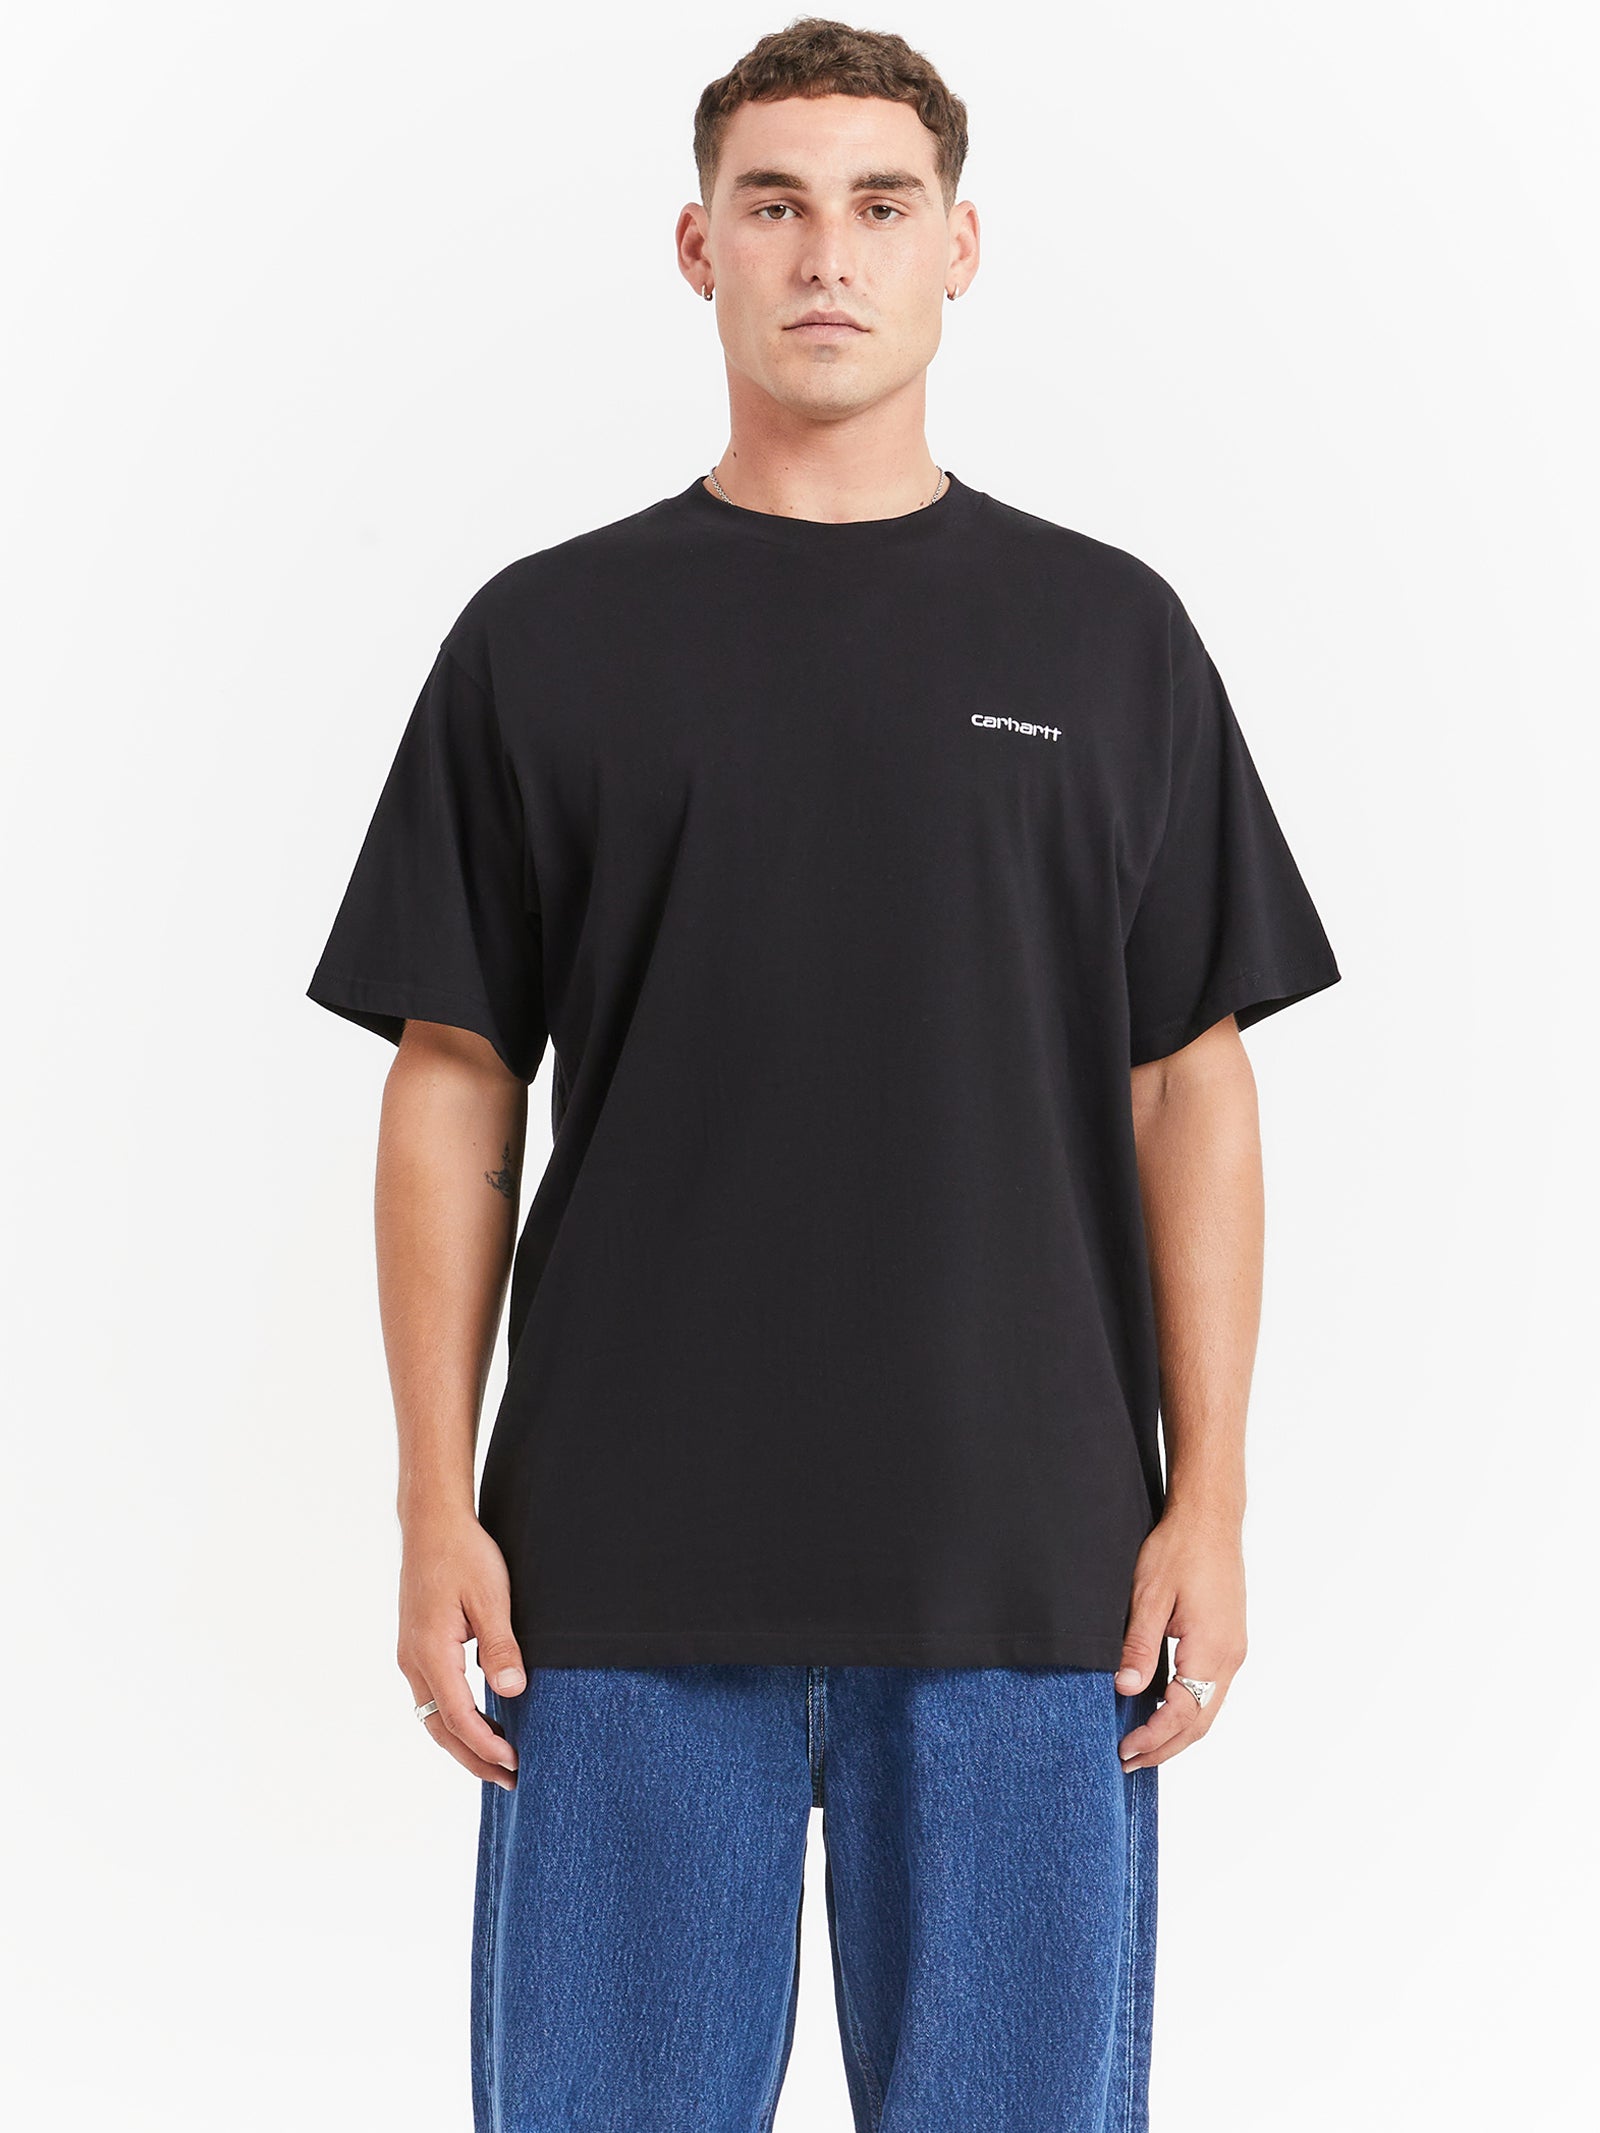 Script Embroidery T-Shirt in Black & White